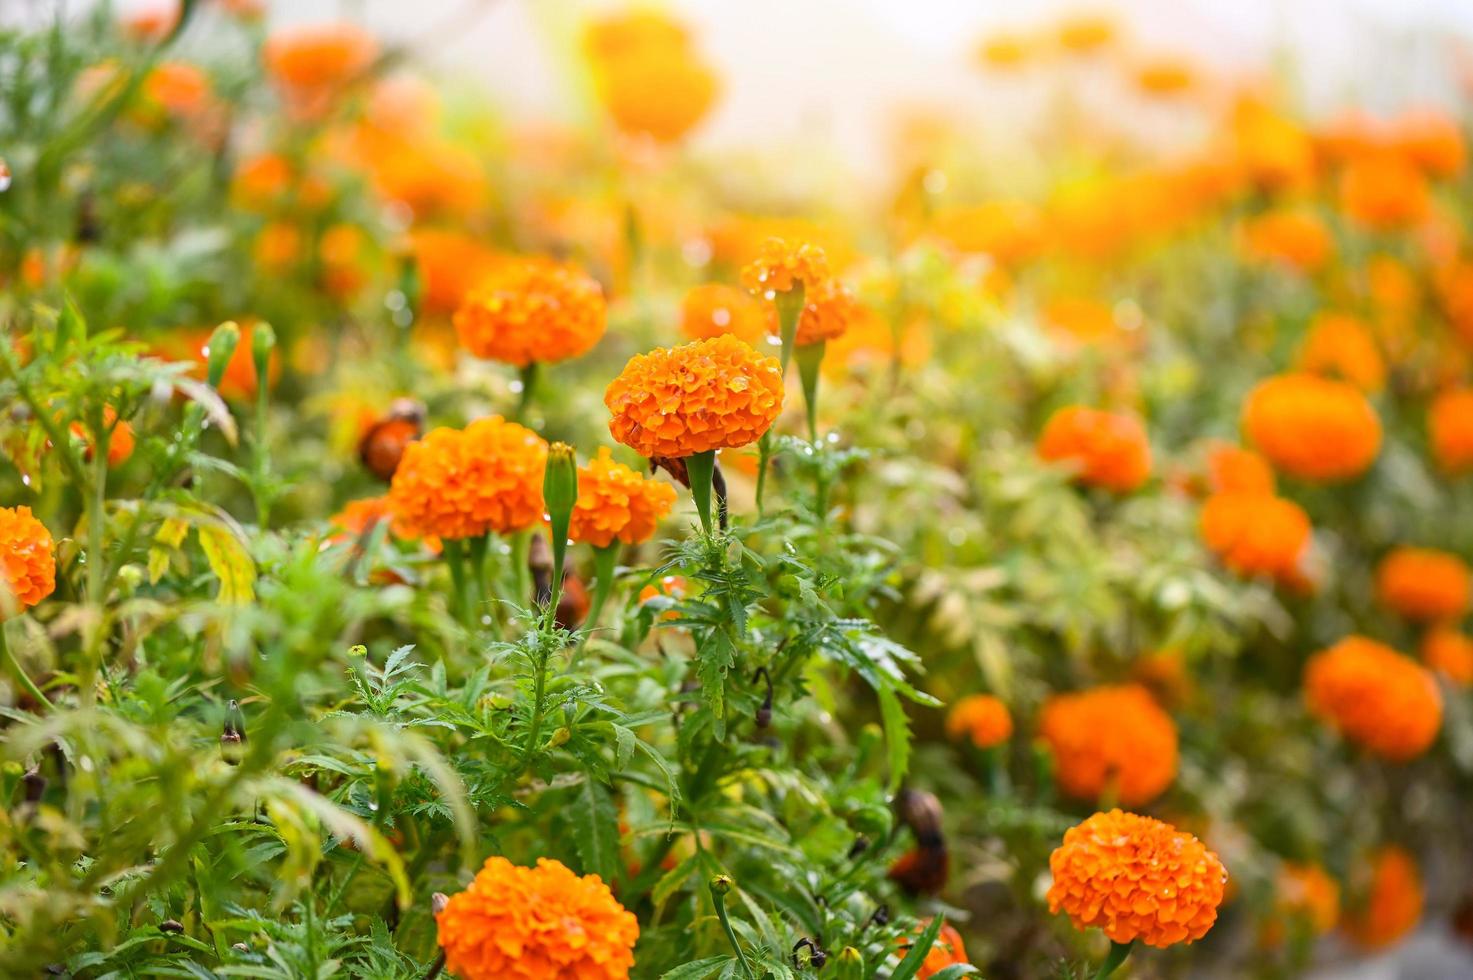 field of marigold flowers on tree in the garden, Orange floral marigold yellow flowers in summer photo